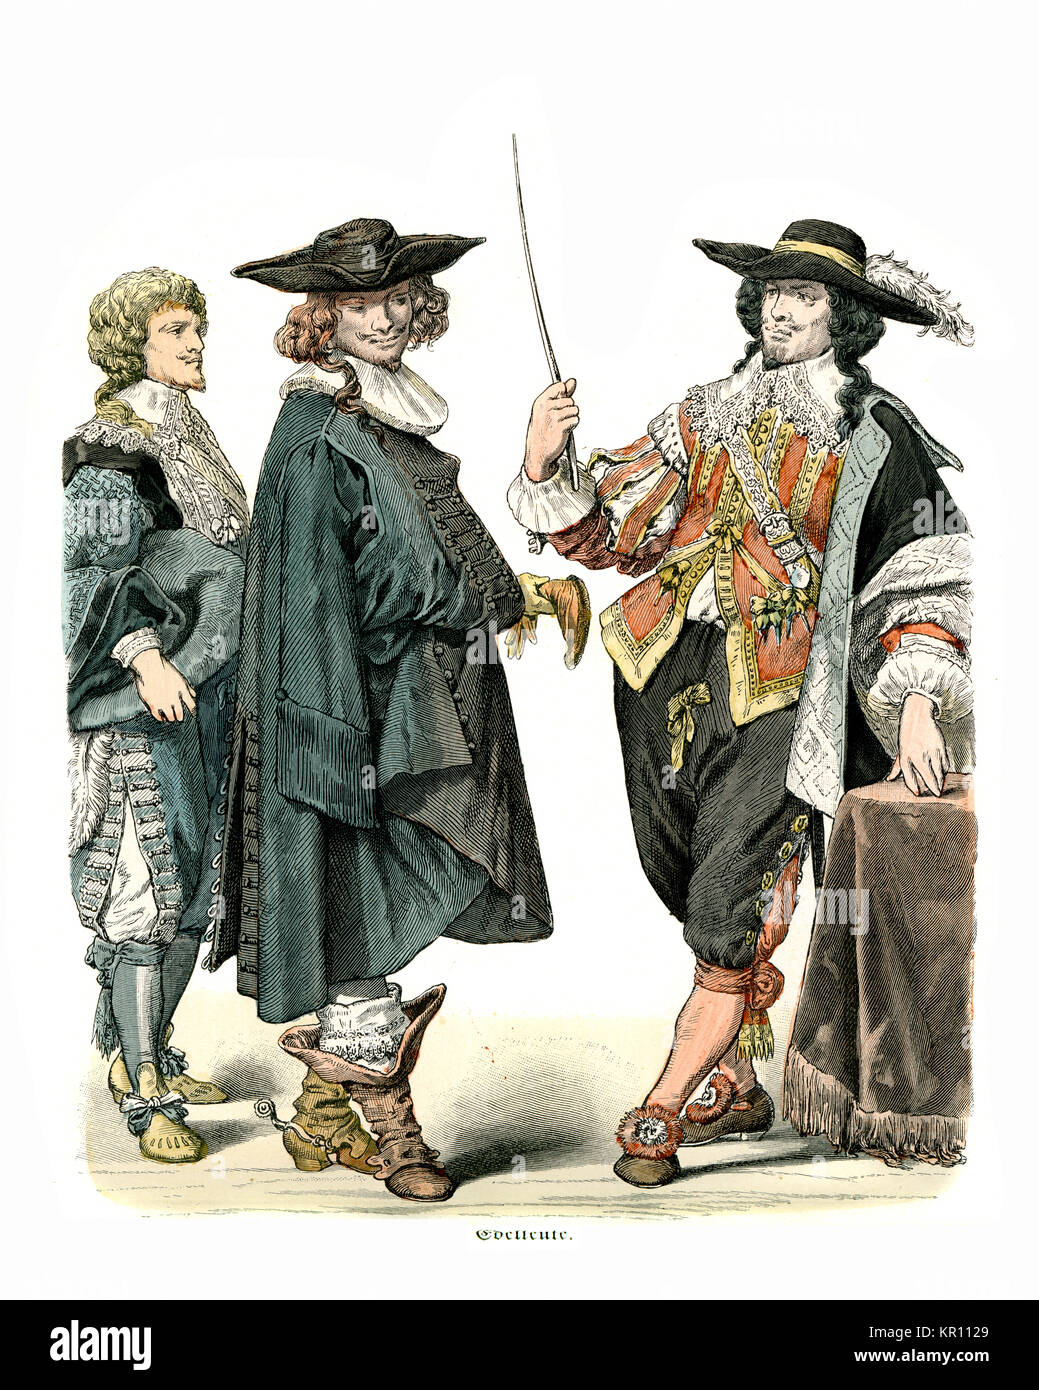 History of Fashion, Costumes of French noblemen of the mid 17th Century Stock Photo